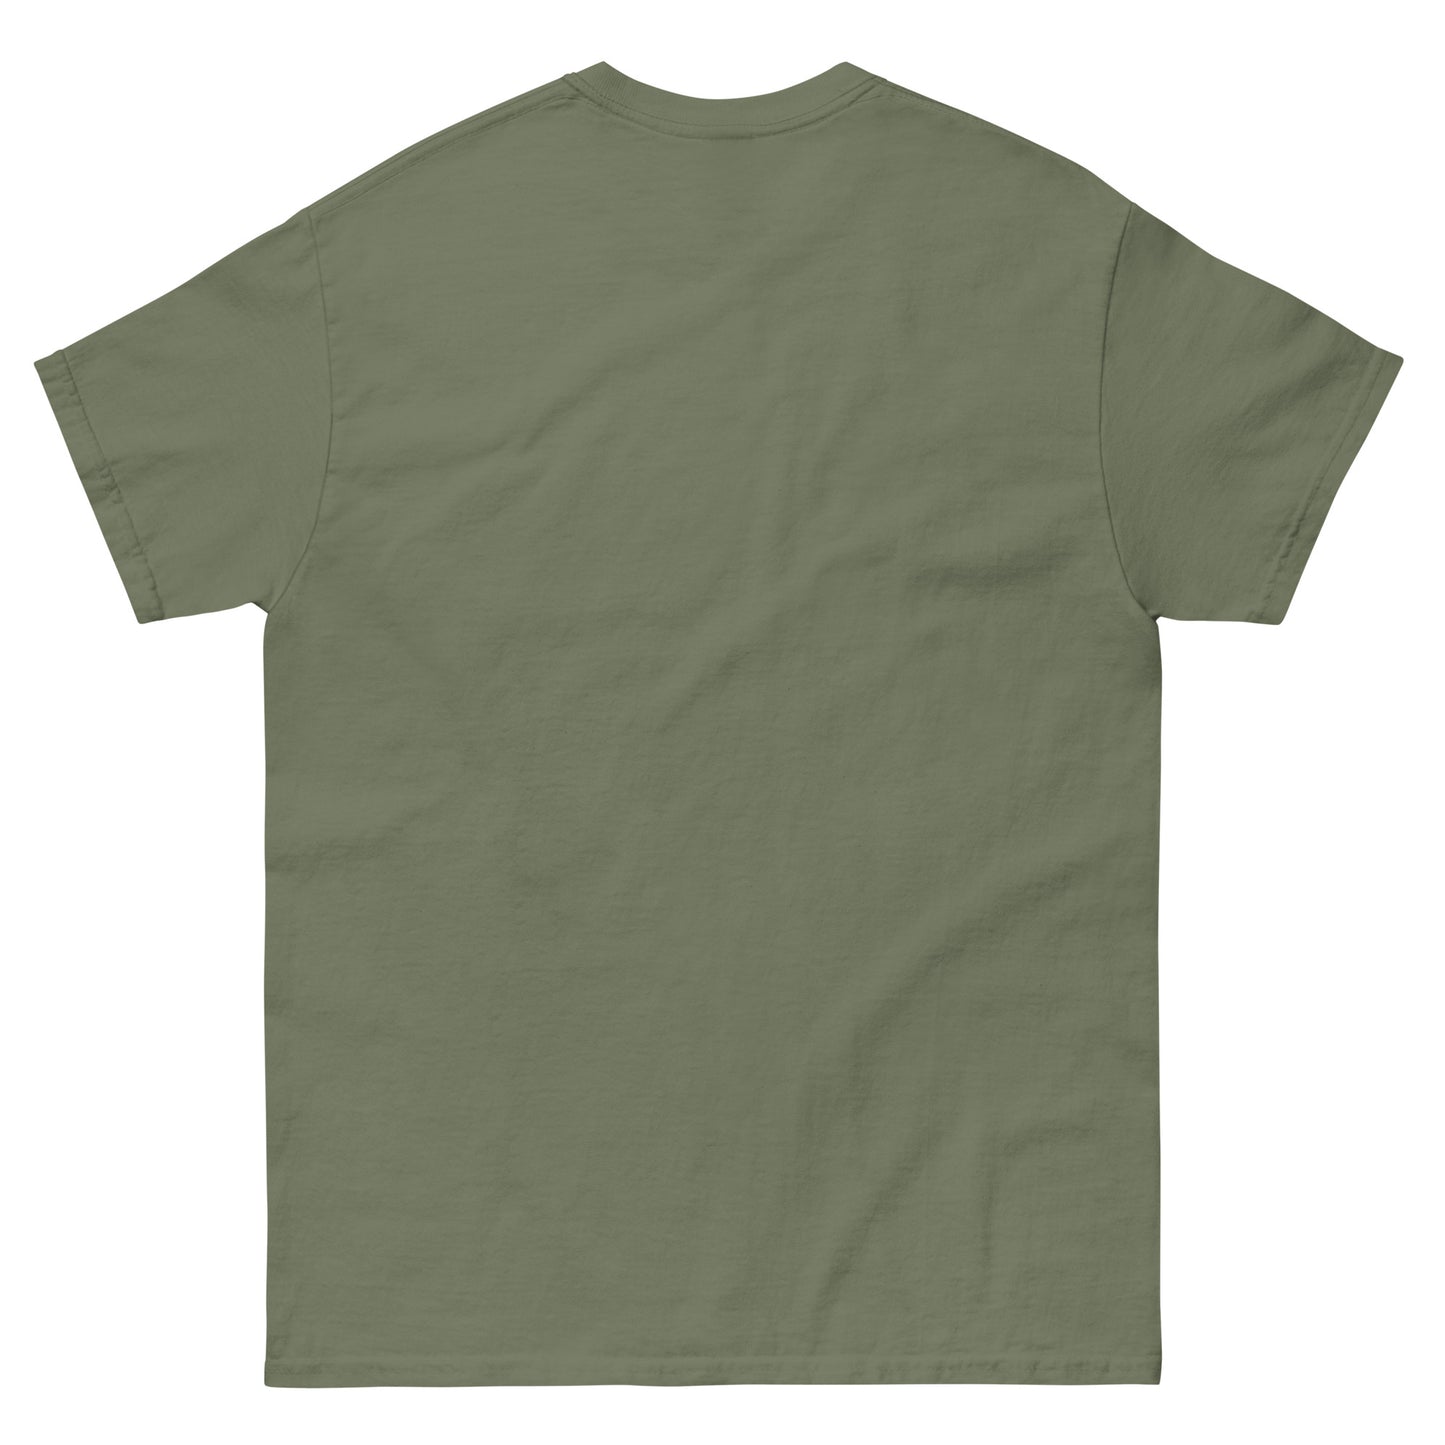 Caddy Pack "Day 1" T-Shirt